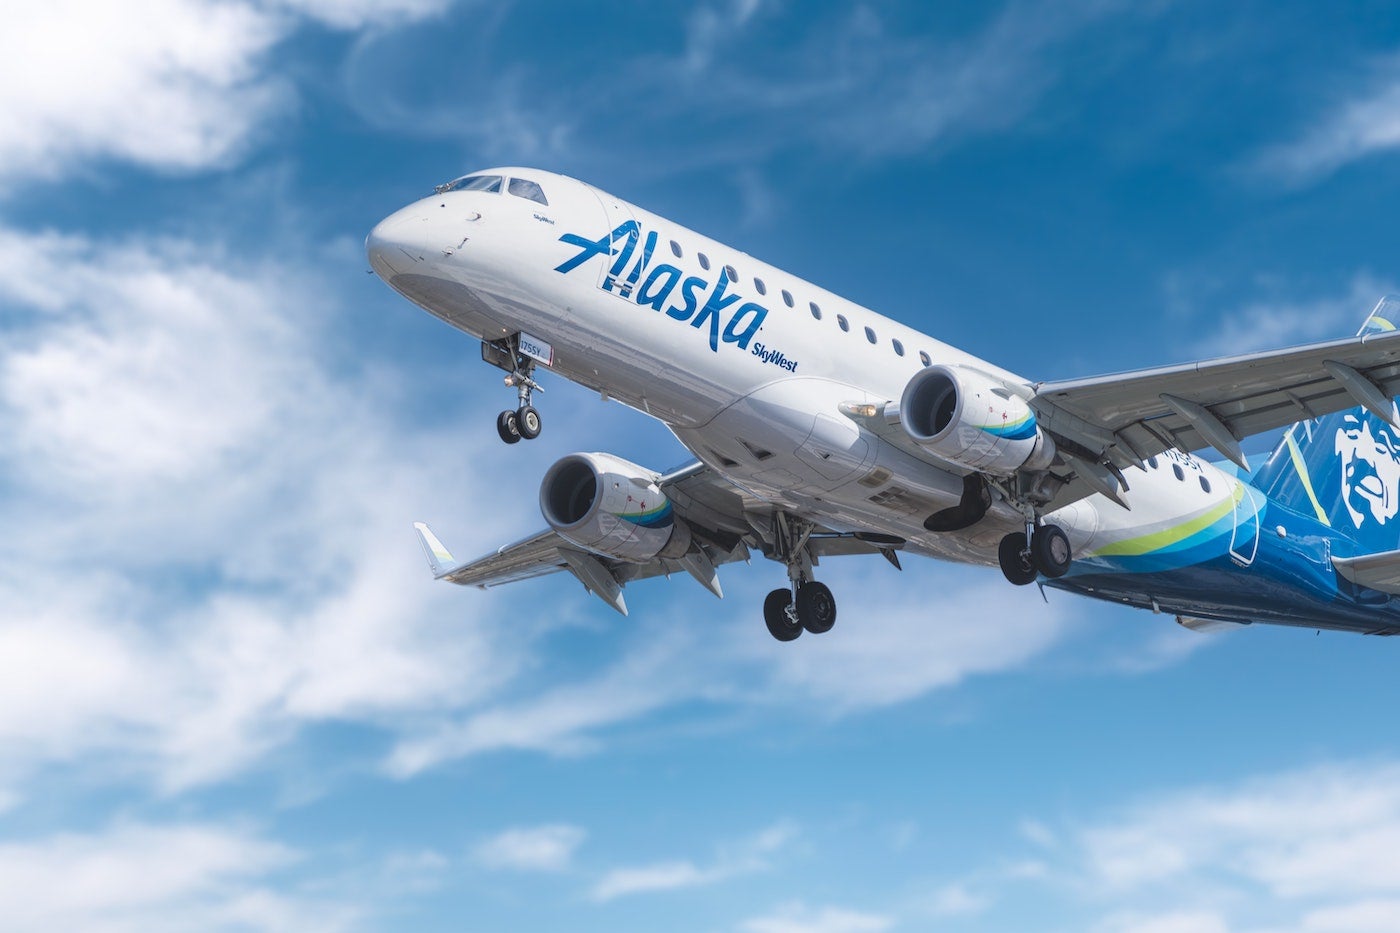 Alaska Airlines adopts edge analytics solution for real-time, passenger data